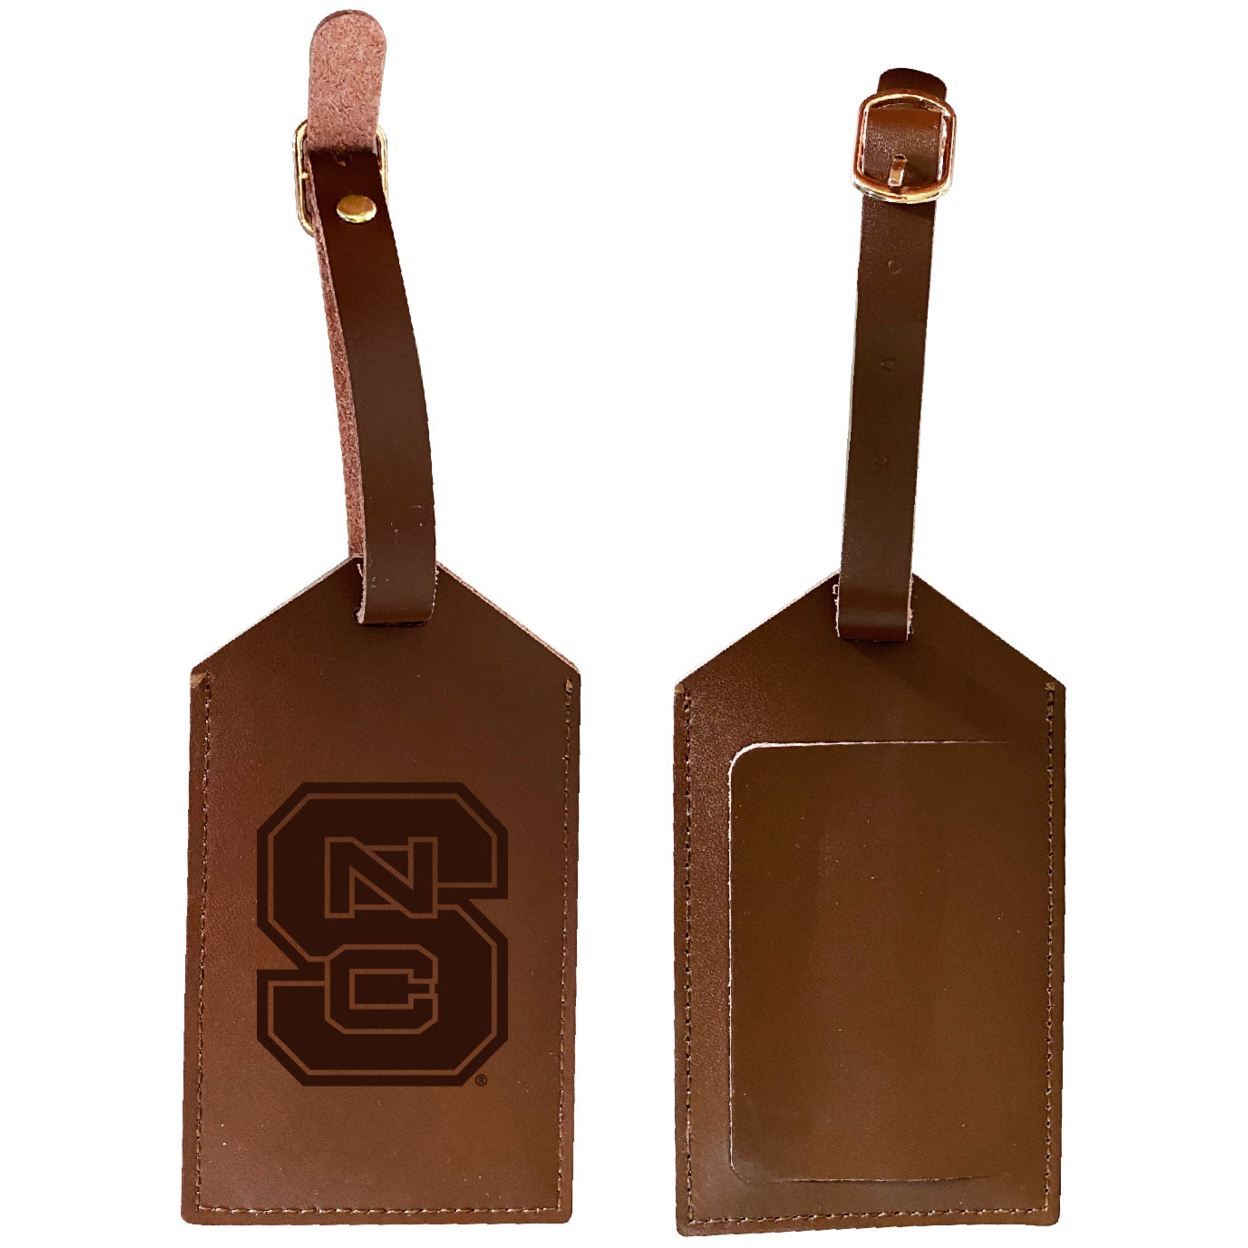 NC State Wolfpack Leather Luggage Tag Engraved